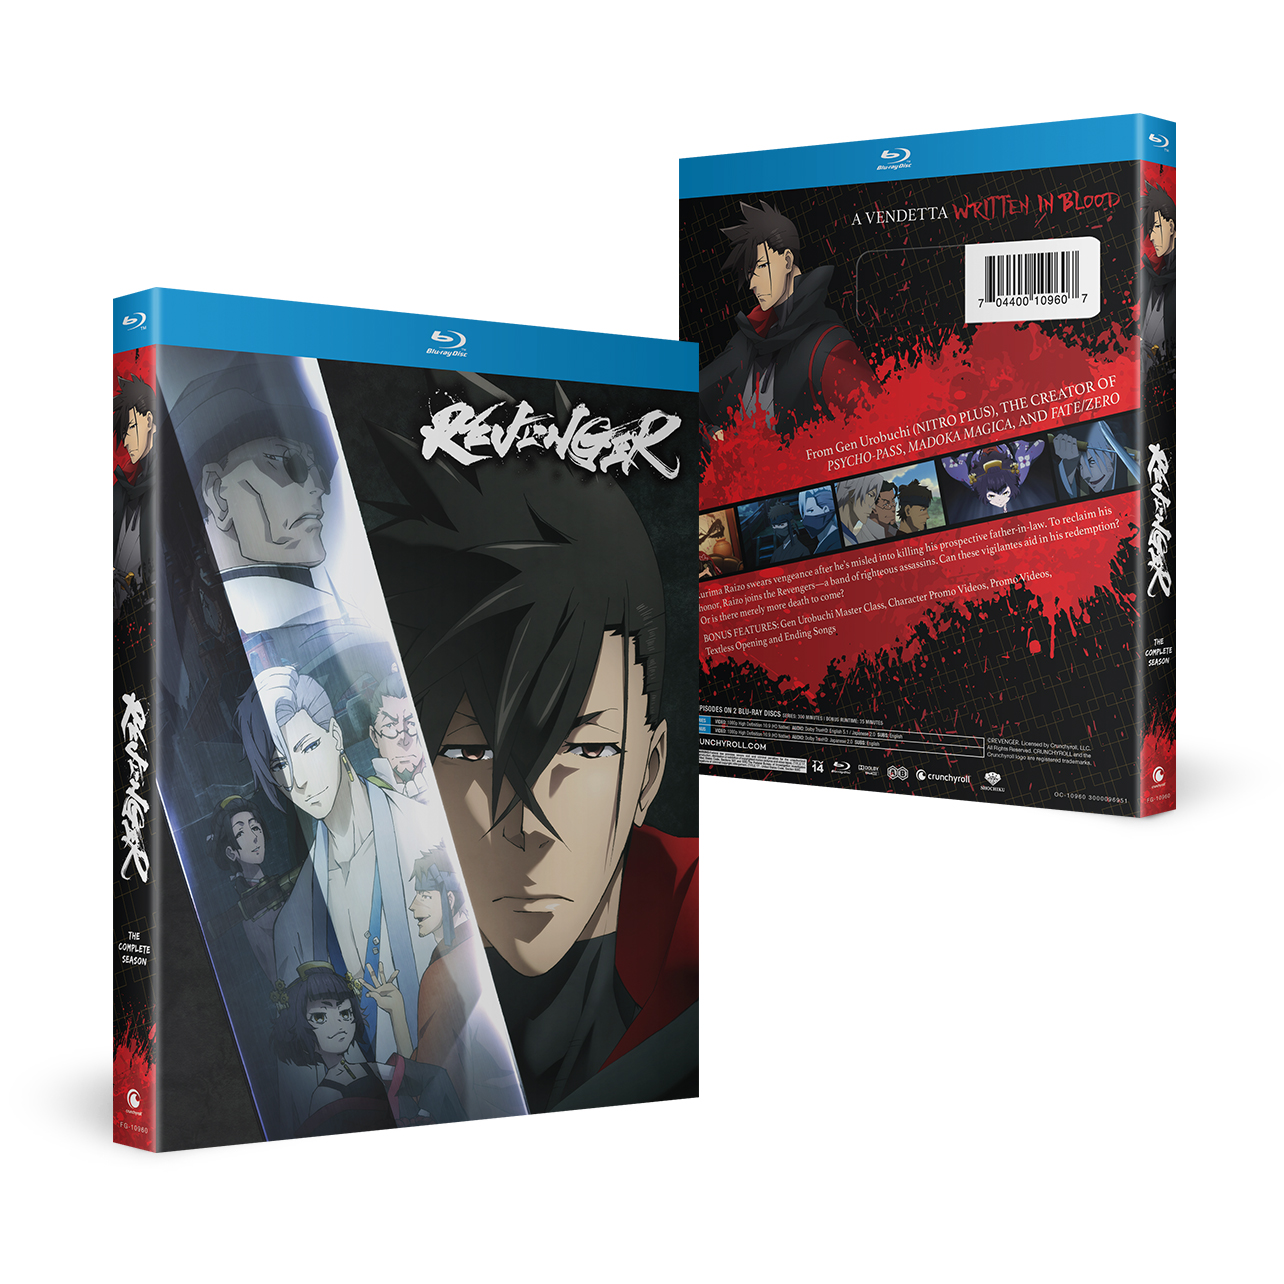 Revenger - The Complete Season - Blu-ray image count 0